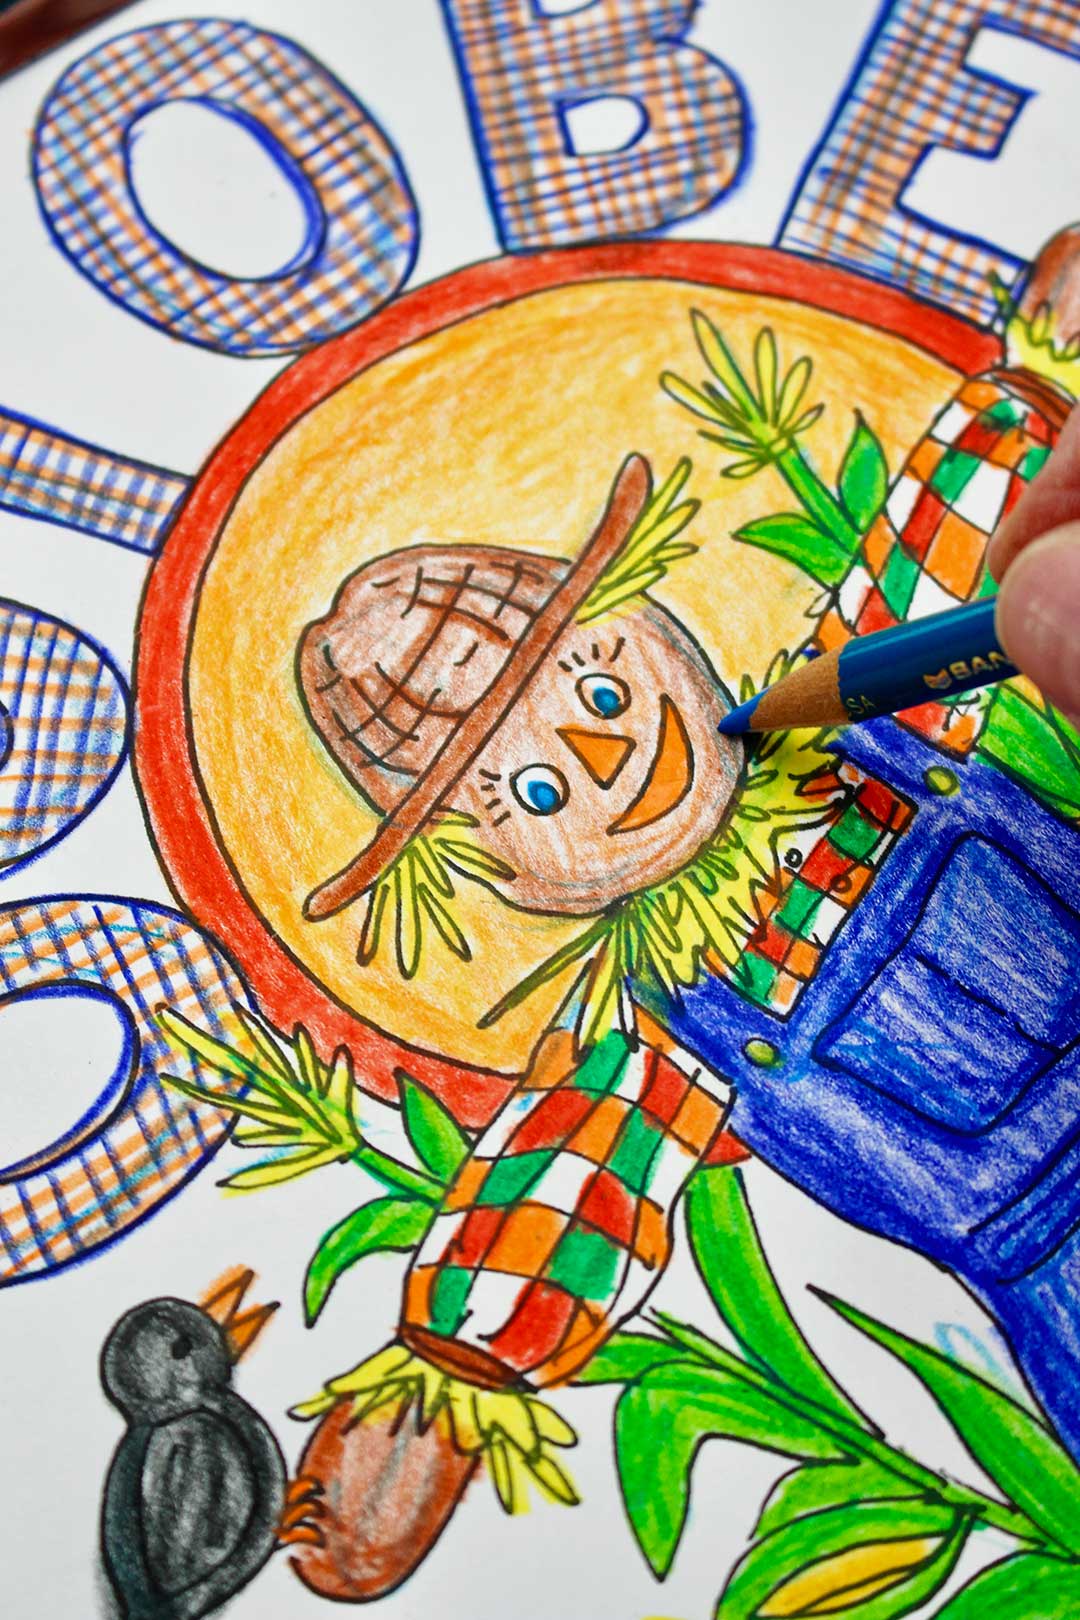 Blue colored pencil shading in detail in the scarecrows face of the October coloring page.